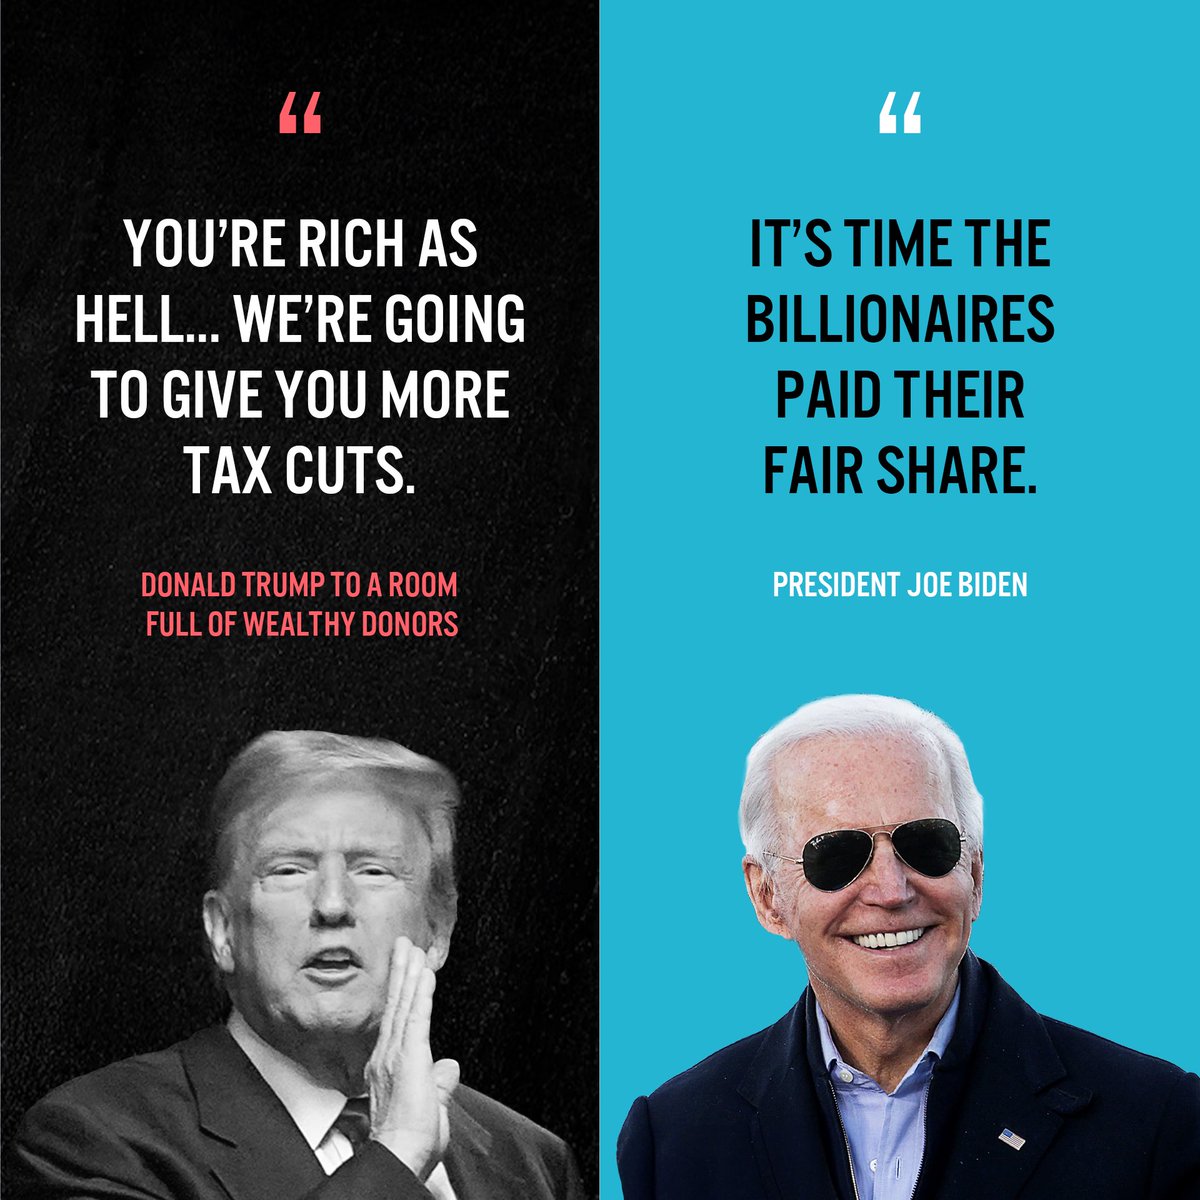 #StopTrumpsTaxScams the rich keep getting richer must stop We don’t need a grifter in the WH who only cares about helping his rich friends Vote for Joe who cares about the rest of us! 💙 #DemsUnited #DemVoice1 #wtpBLUE #ResistanceUnited